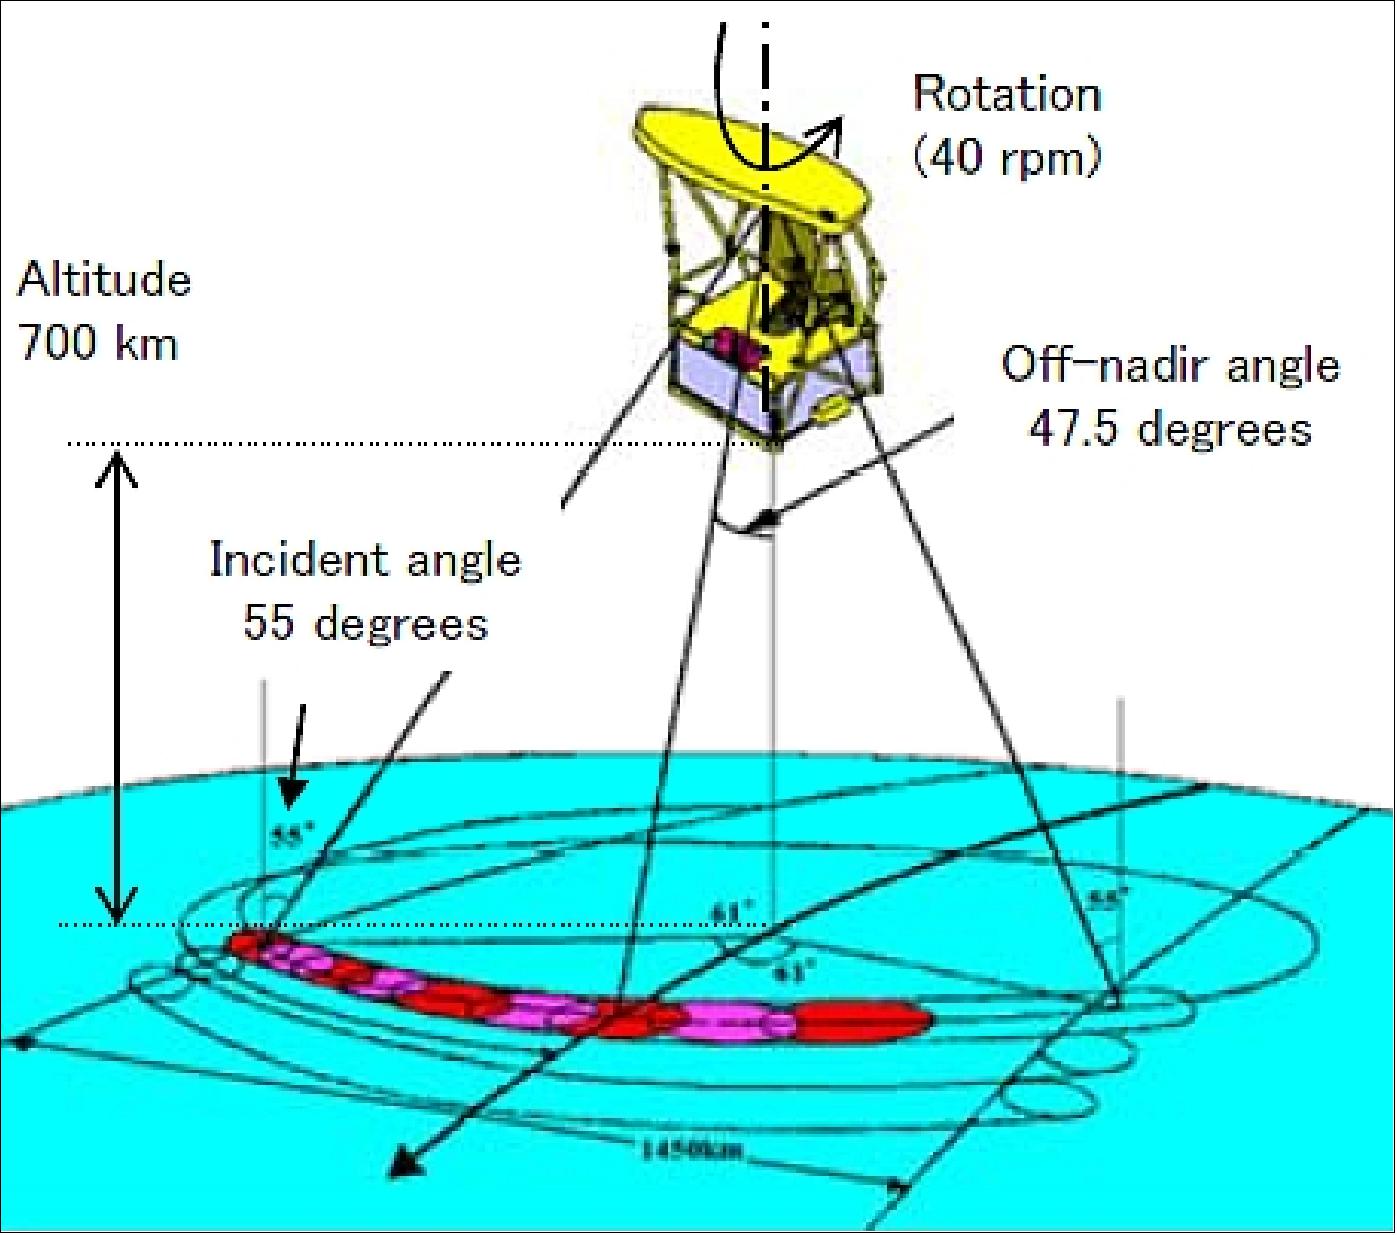 Figure 27: Conical scanning configuration of AMSR2 on GCOM-W1 with a swath width of 1450 km (image credit: JAXA)